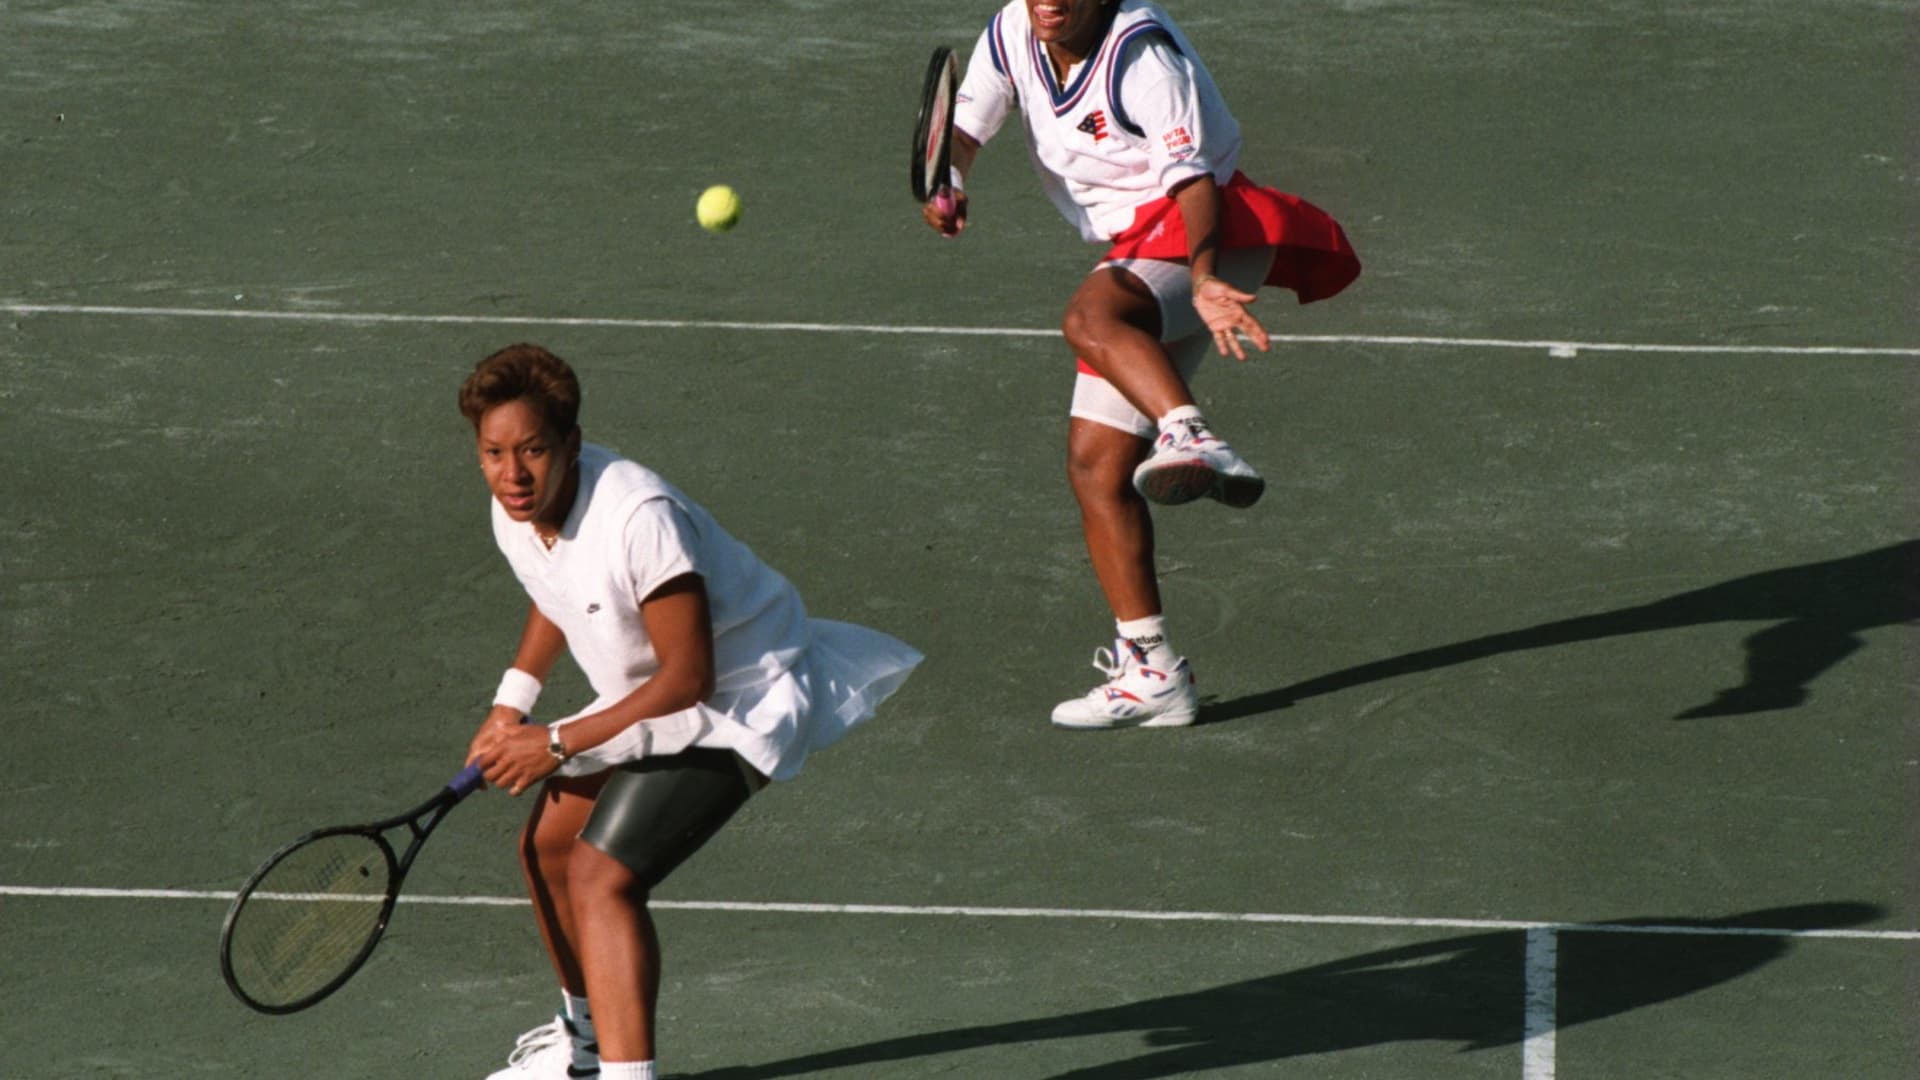 25 MAY 1995:ZINA GARRISON-JACKSON PLAYS A SHOT OVER THE HEAD OF PARTNER KATRINA ADAMS DURING THEIR MATCH AGAINST DEBBIE GRAHAM AND LINDA HARVEY-WILD AT THE 1995 WORLD DOUBLES CUP HELD IN EDINBURGH. Mandatory Credit: Mike Cooper/ALLSPORT